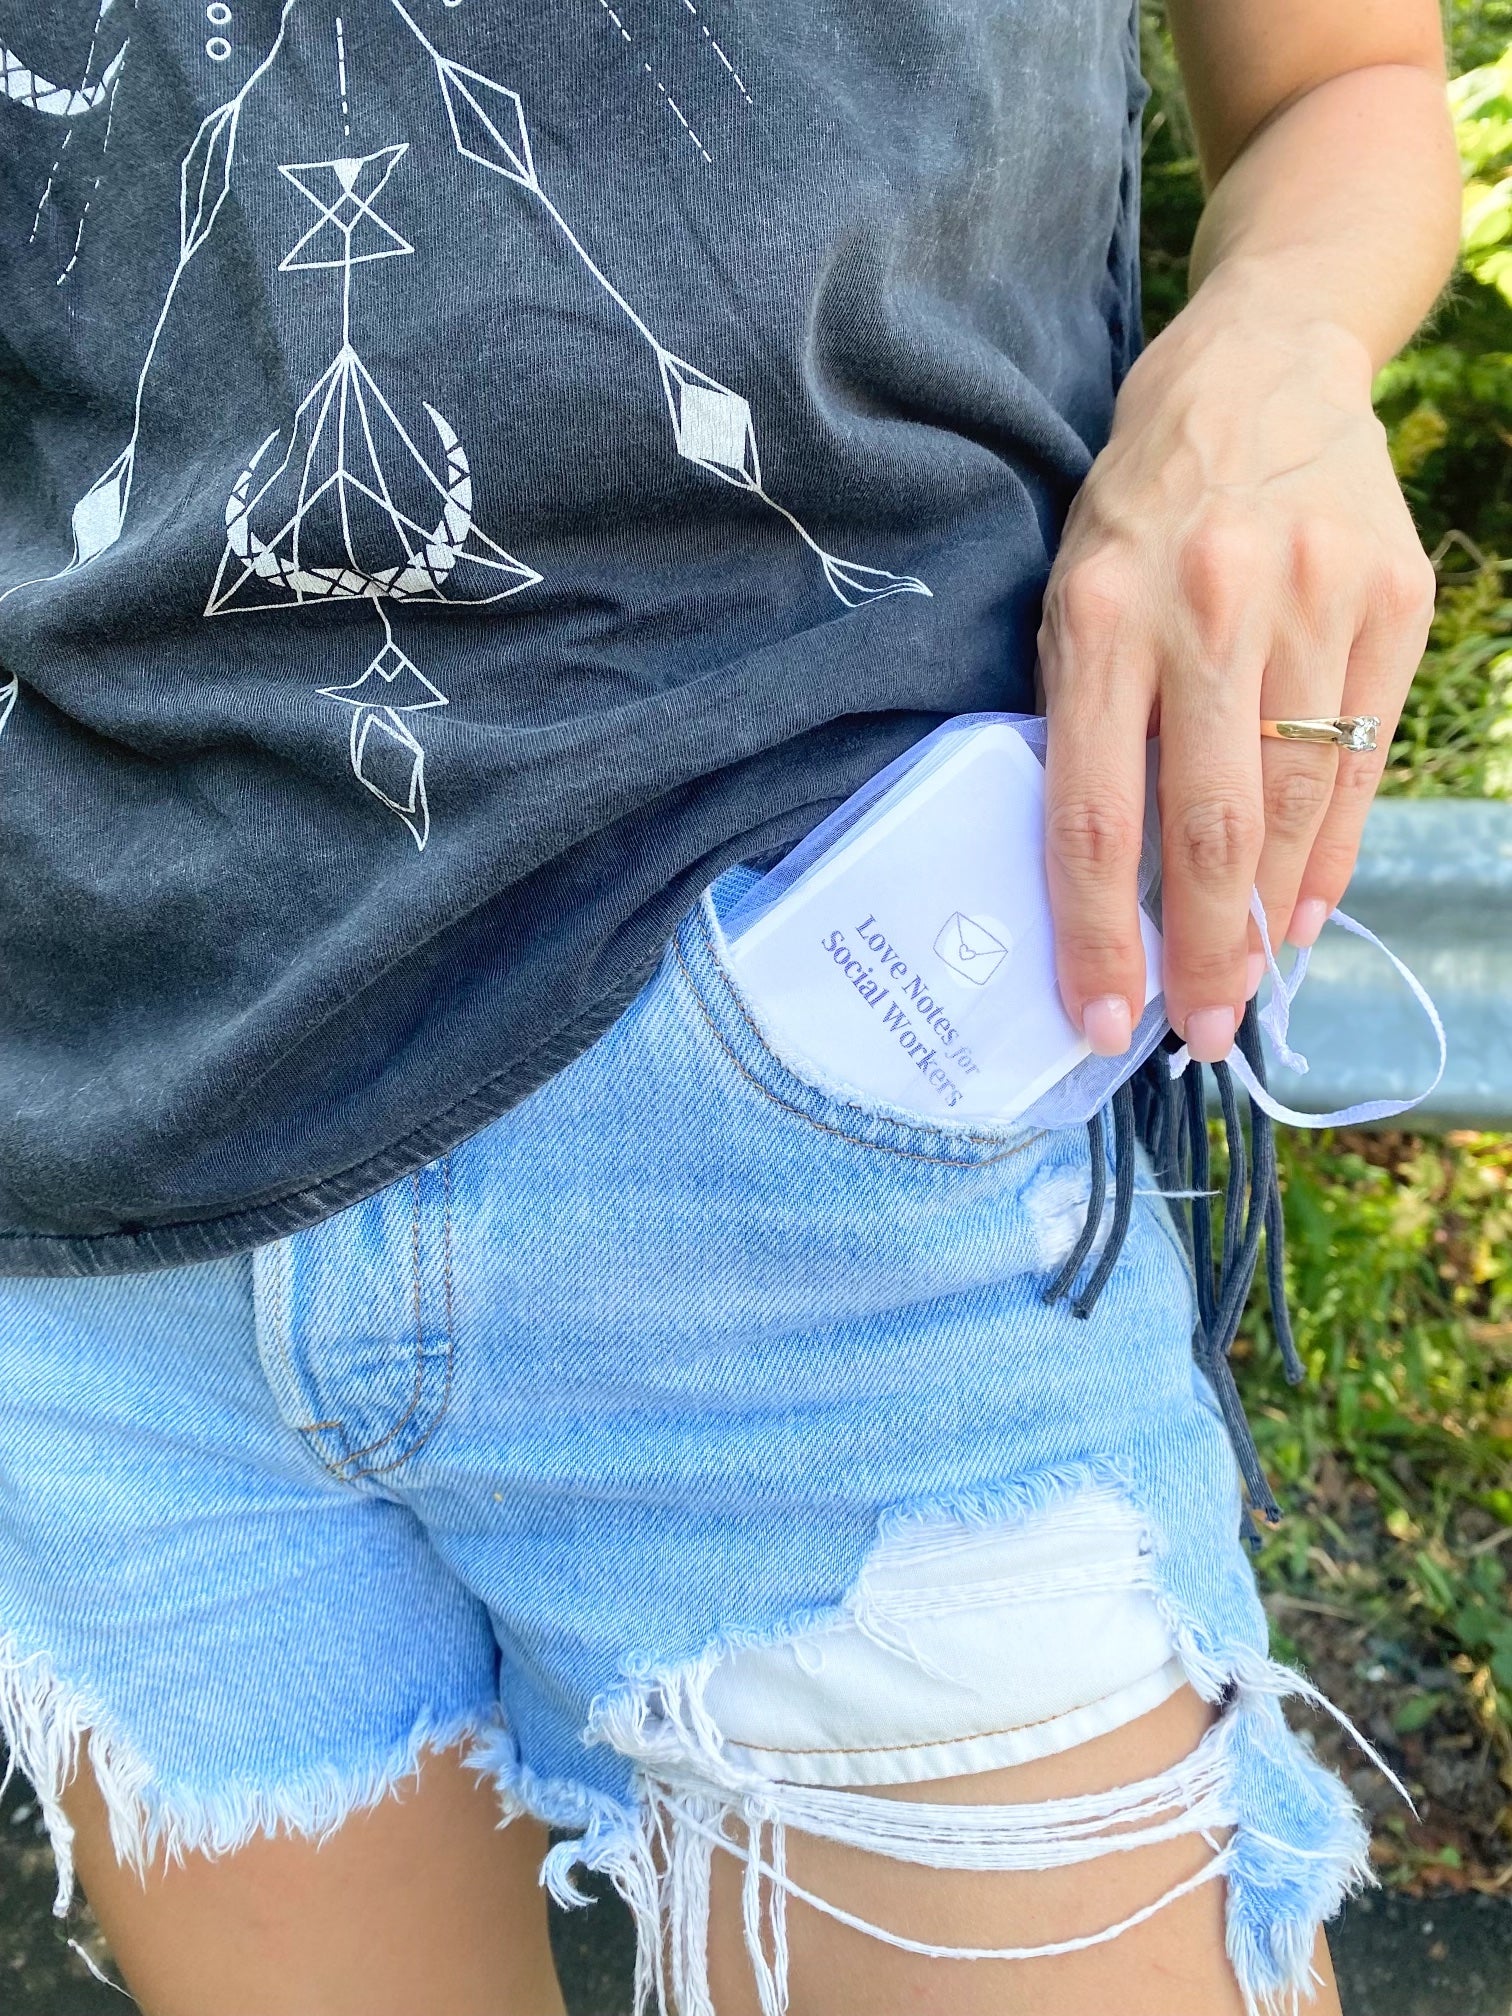 Women pulling card deck out of her jeans pocket to show the cover of the deck "Love Notes for Social Workers". 